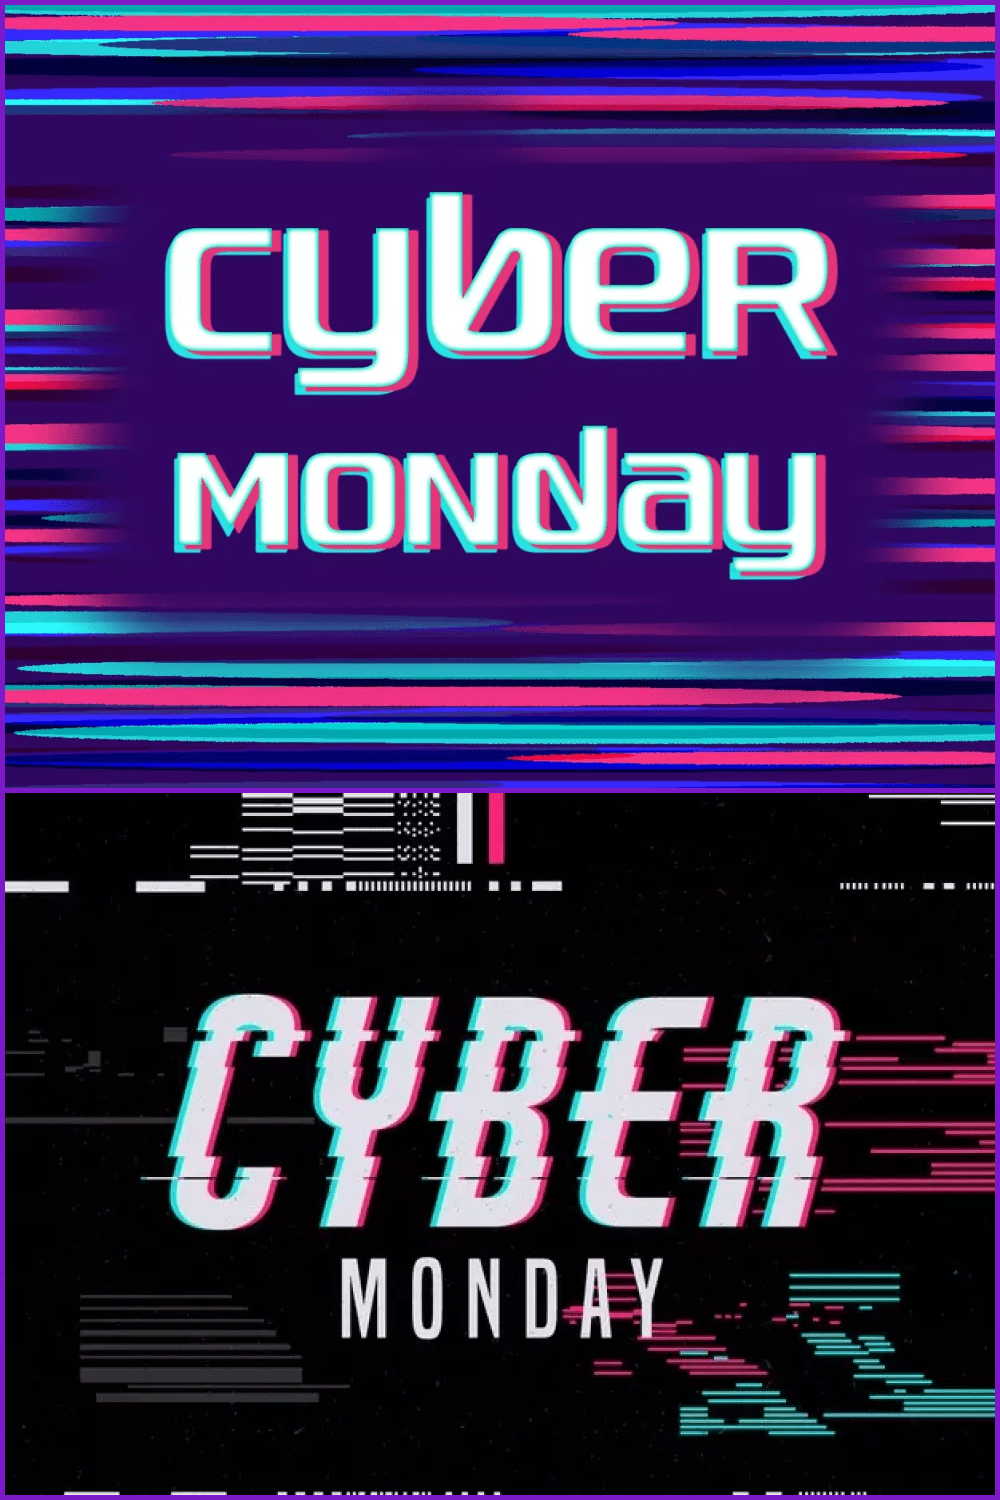 Banner for Cyber Monday with colorful striped background.